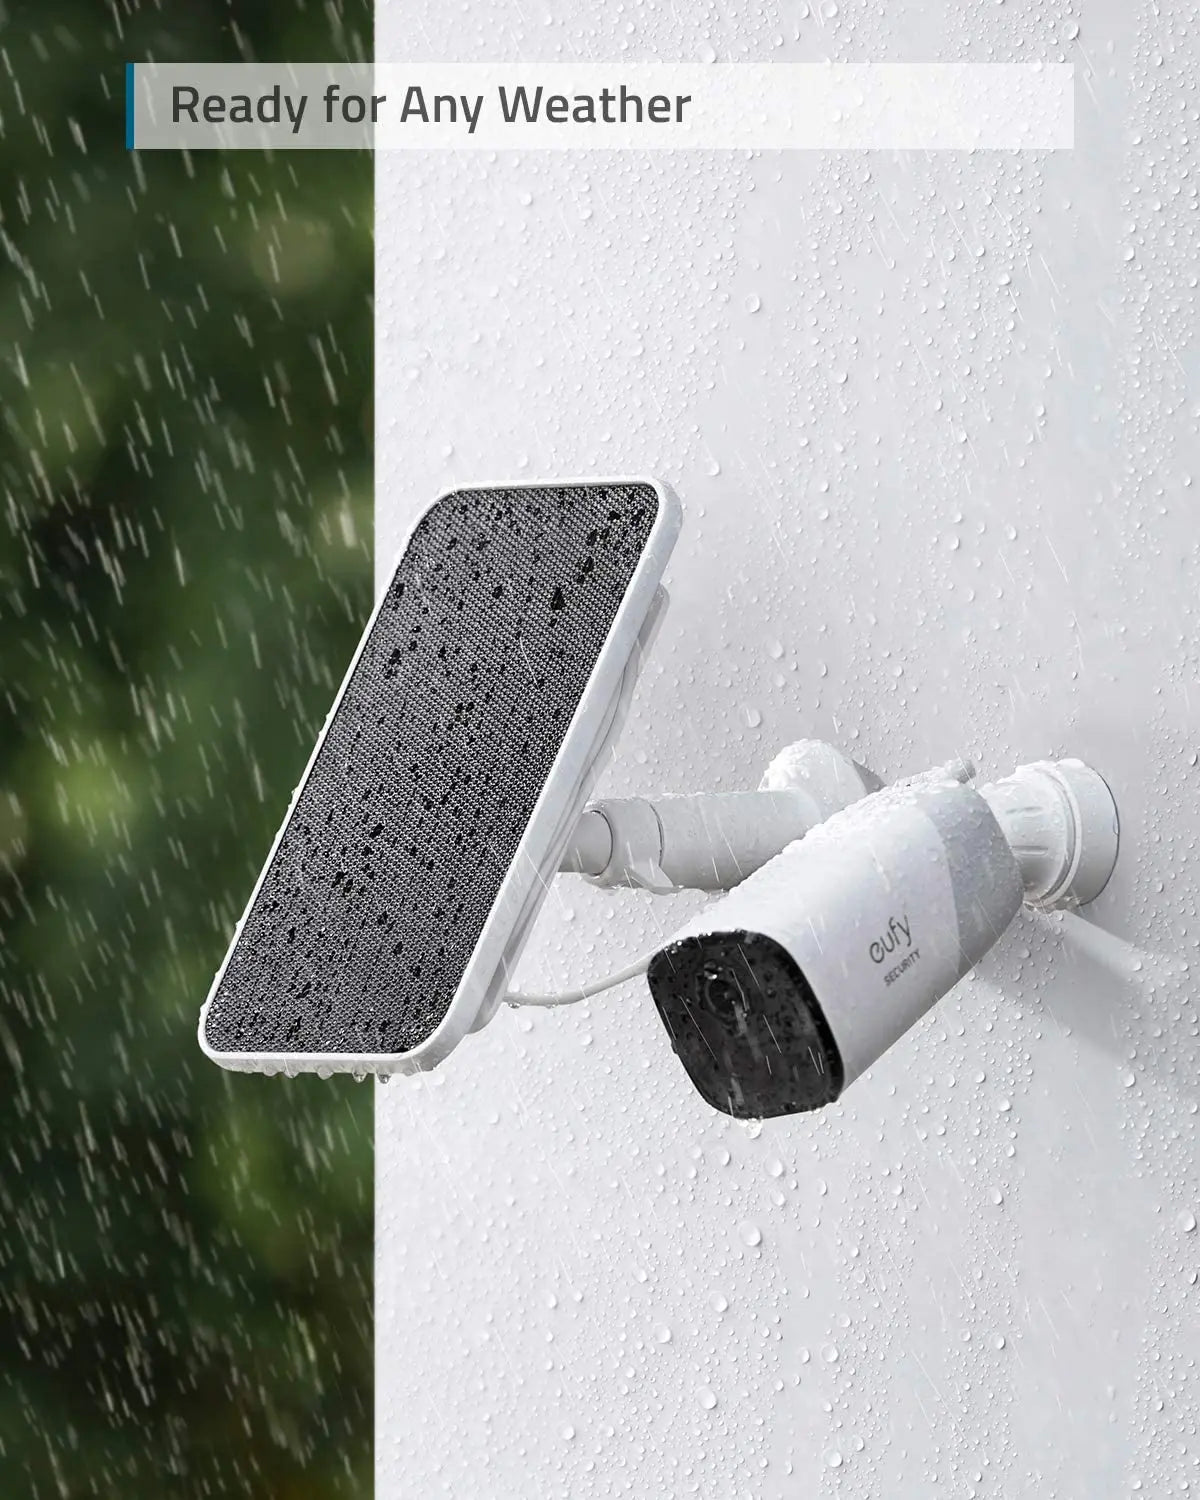 Eufy E40 security SoloCam, Ready for Weather auly Any se